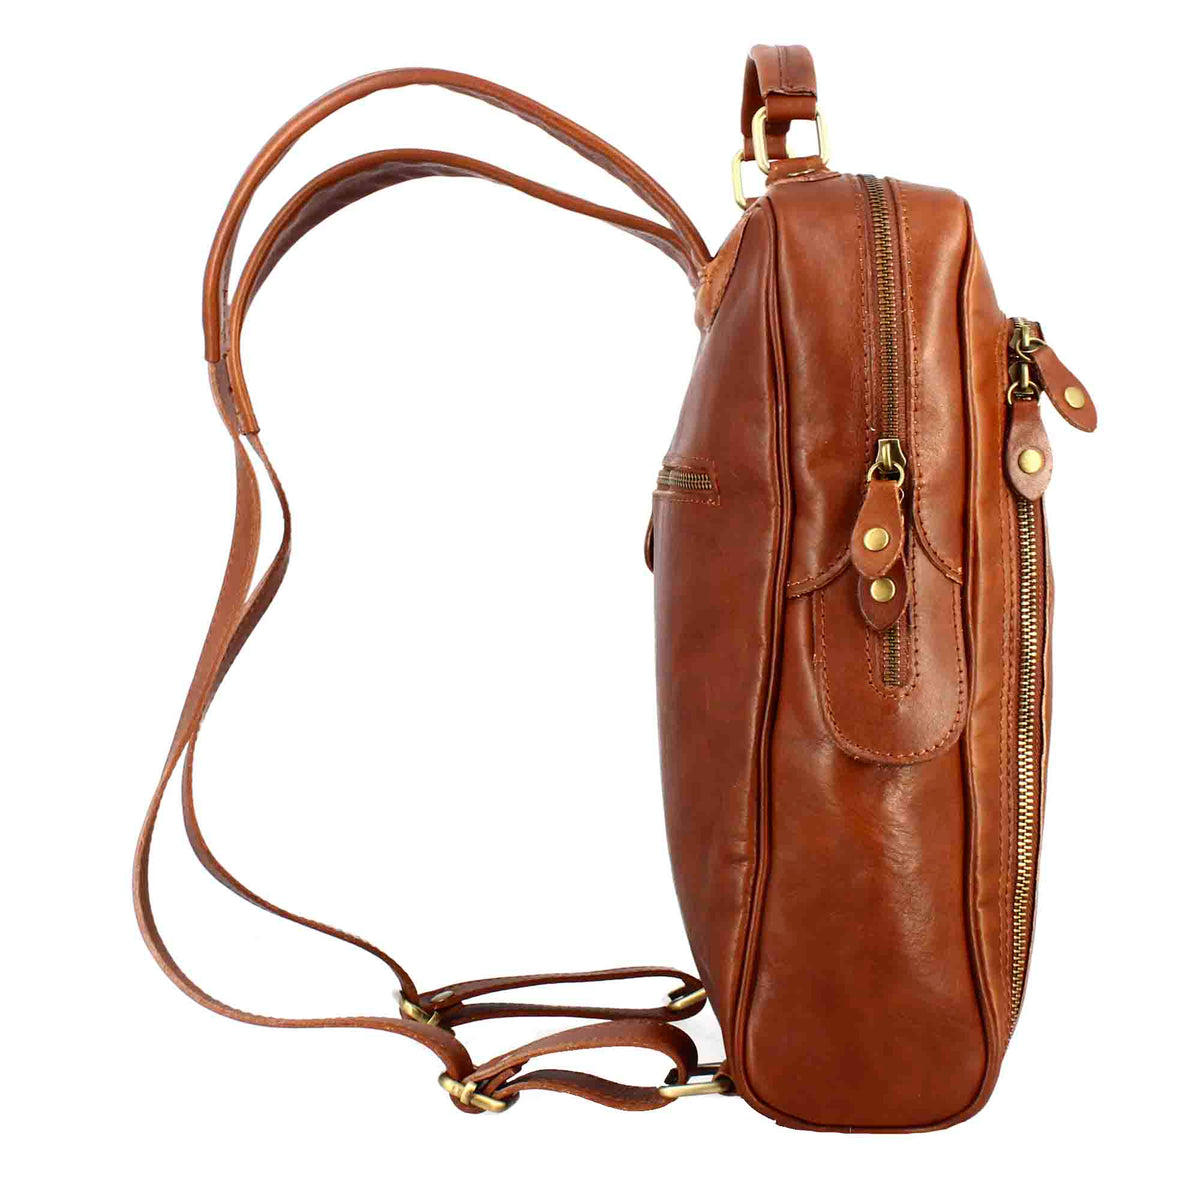 Cosimo men's backpack in brown leather with zip closure